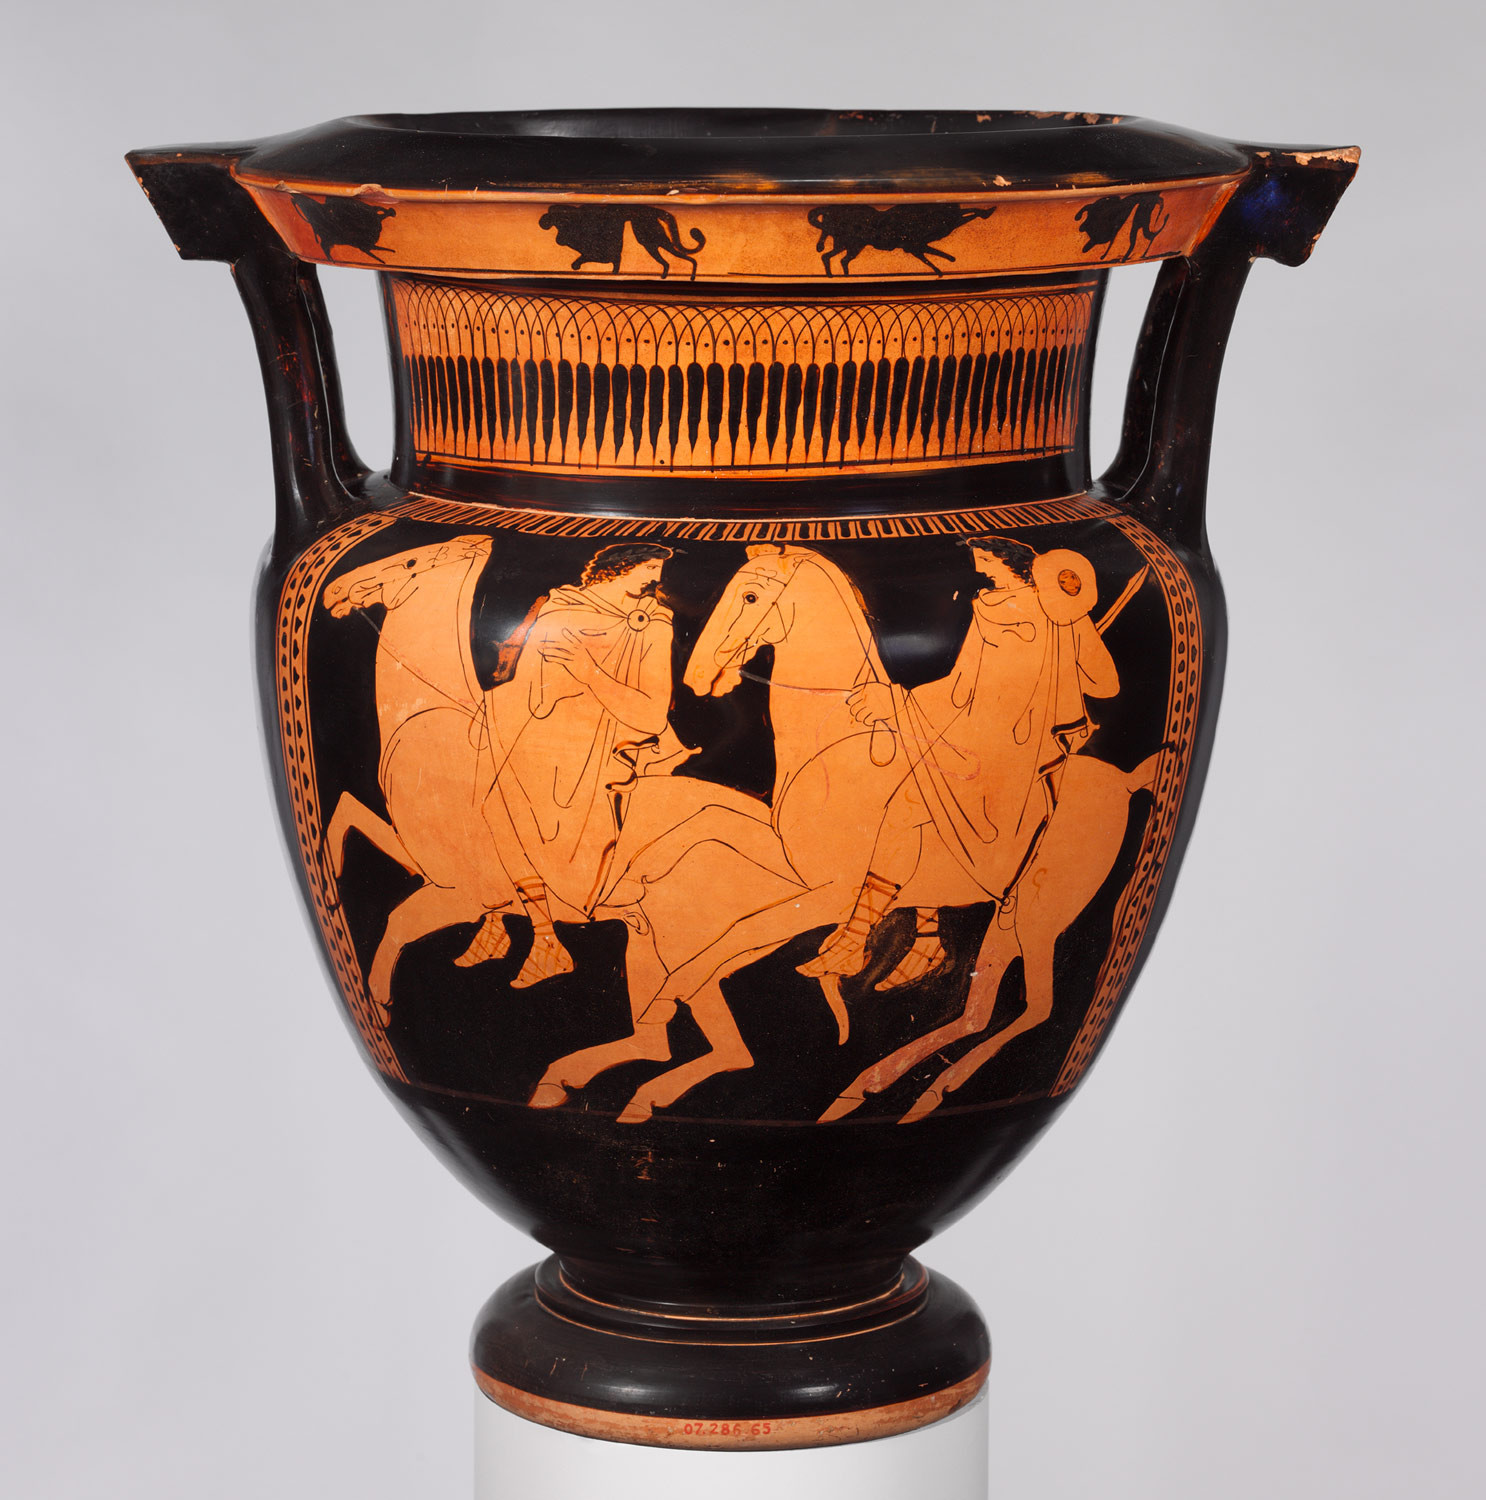 19 Unique athenian Black Figure Vases 2024 free download athenian black figure vases of terracotta column krater bowl for mixing wine and water regarding terracotta column krater bowl for mixing wine and water